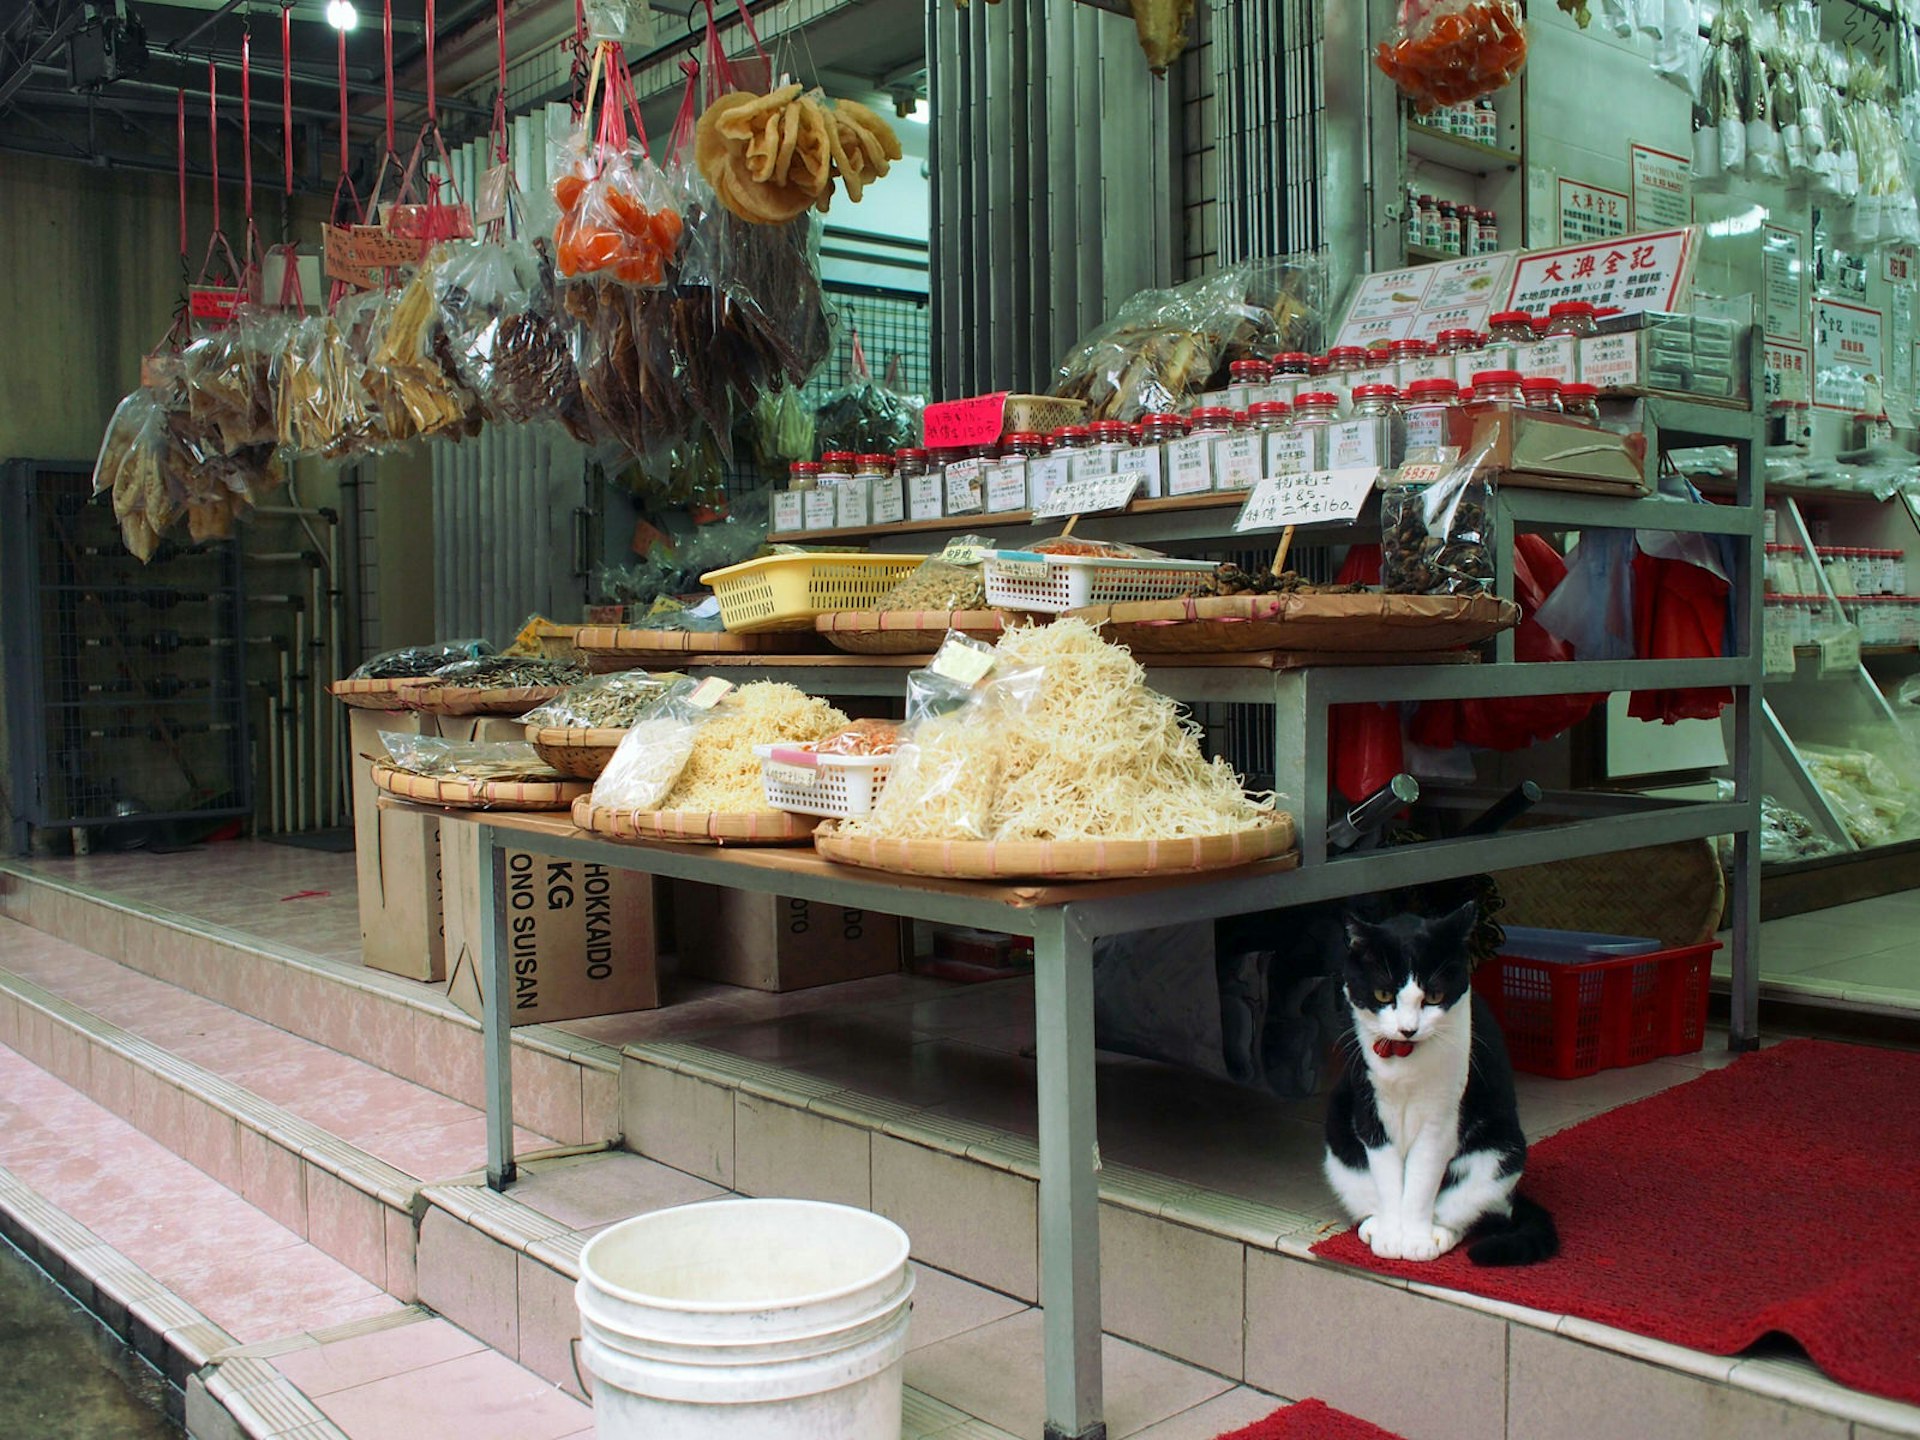 Dried fish hang and sit in piles at a shop storefront, a black and white cat sits on the steps